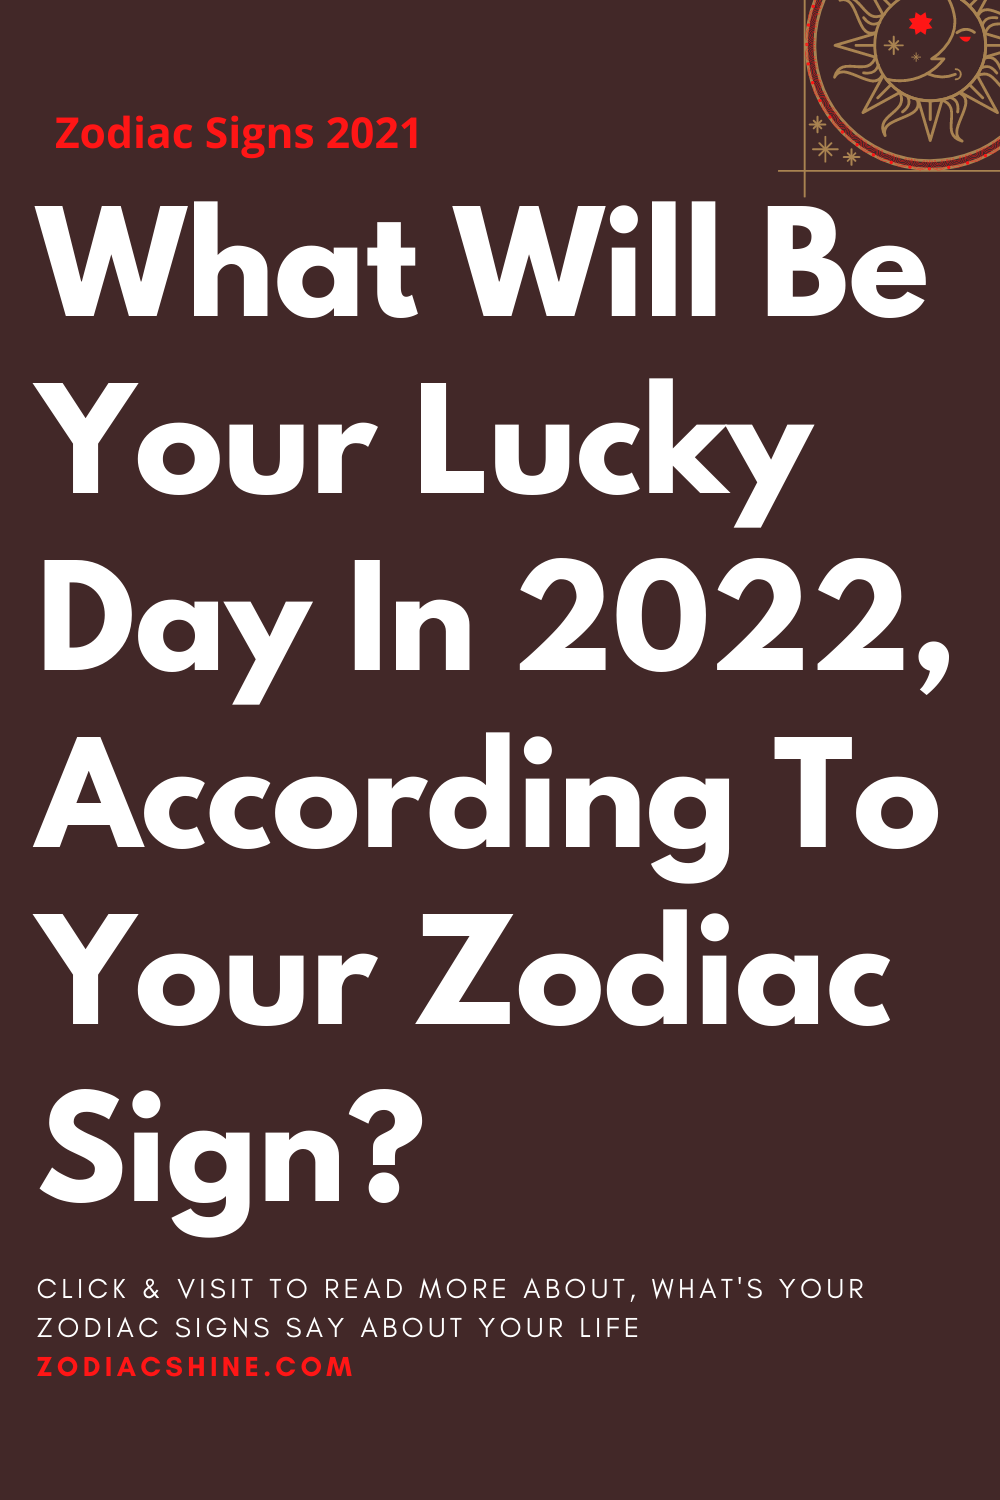 What Will Be Your Lucky Day In 2022, According To Your Zodiac Sign?